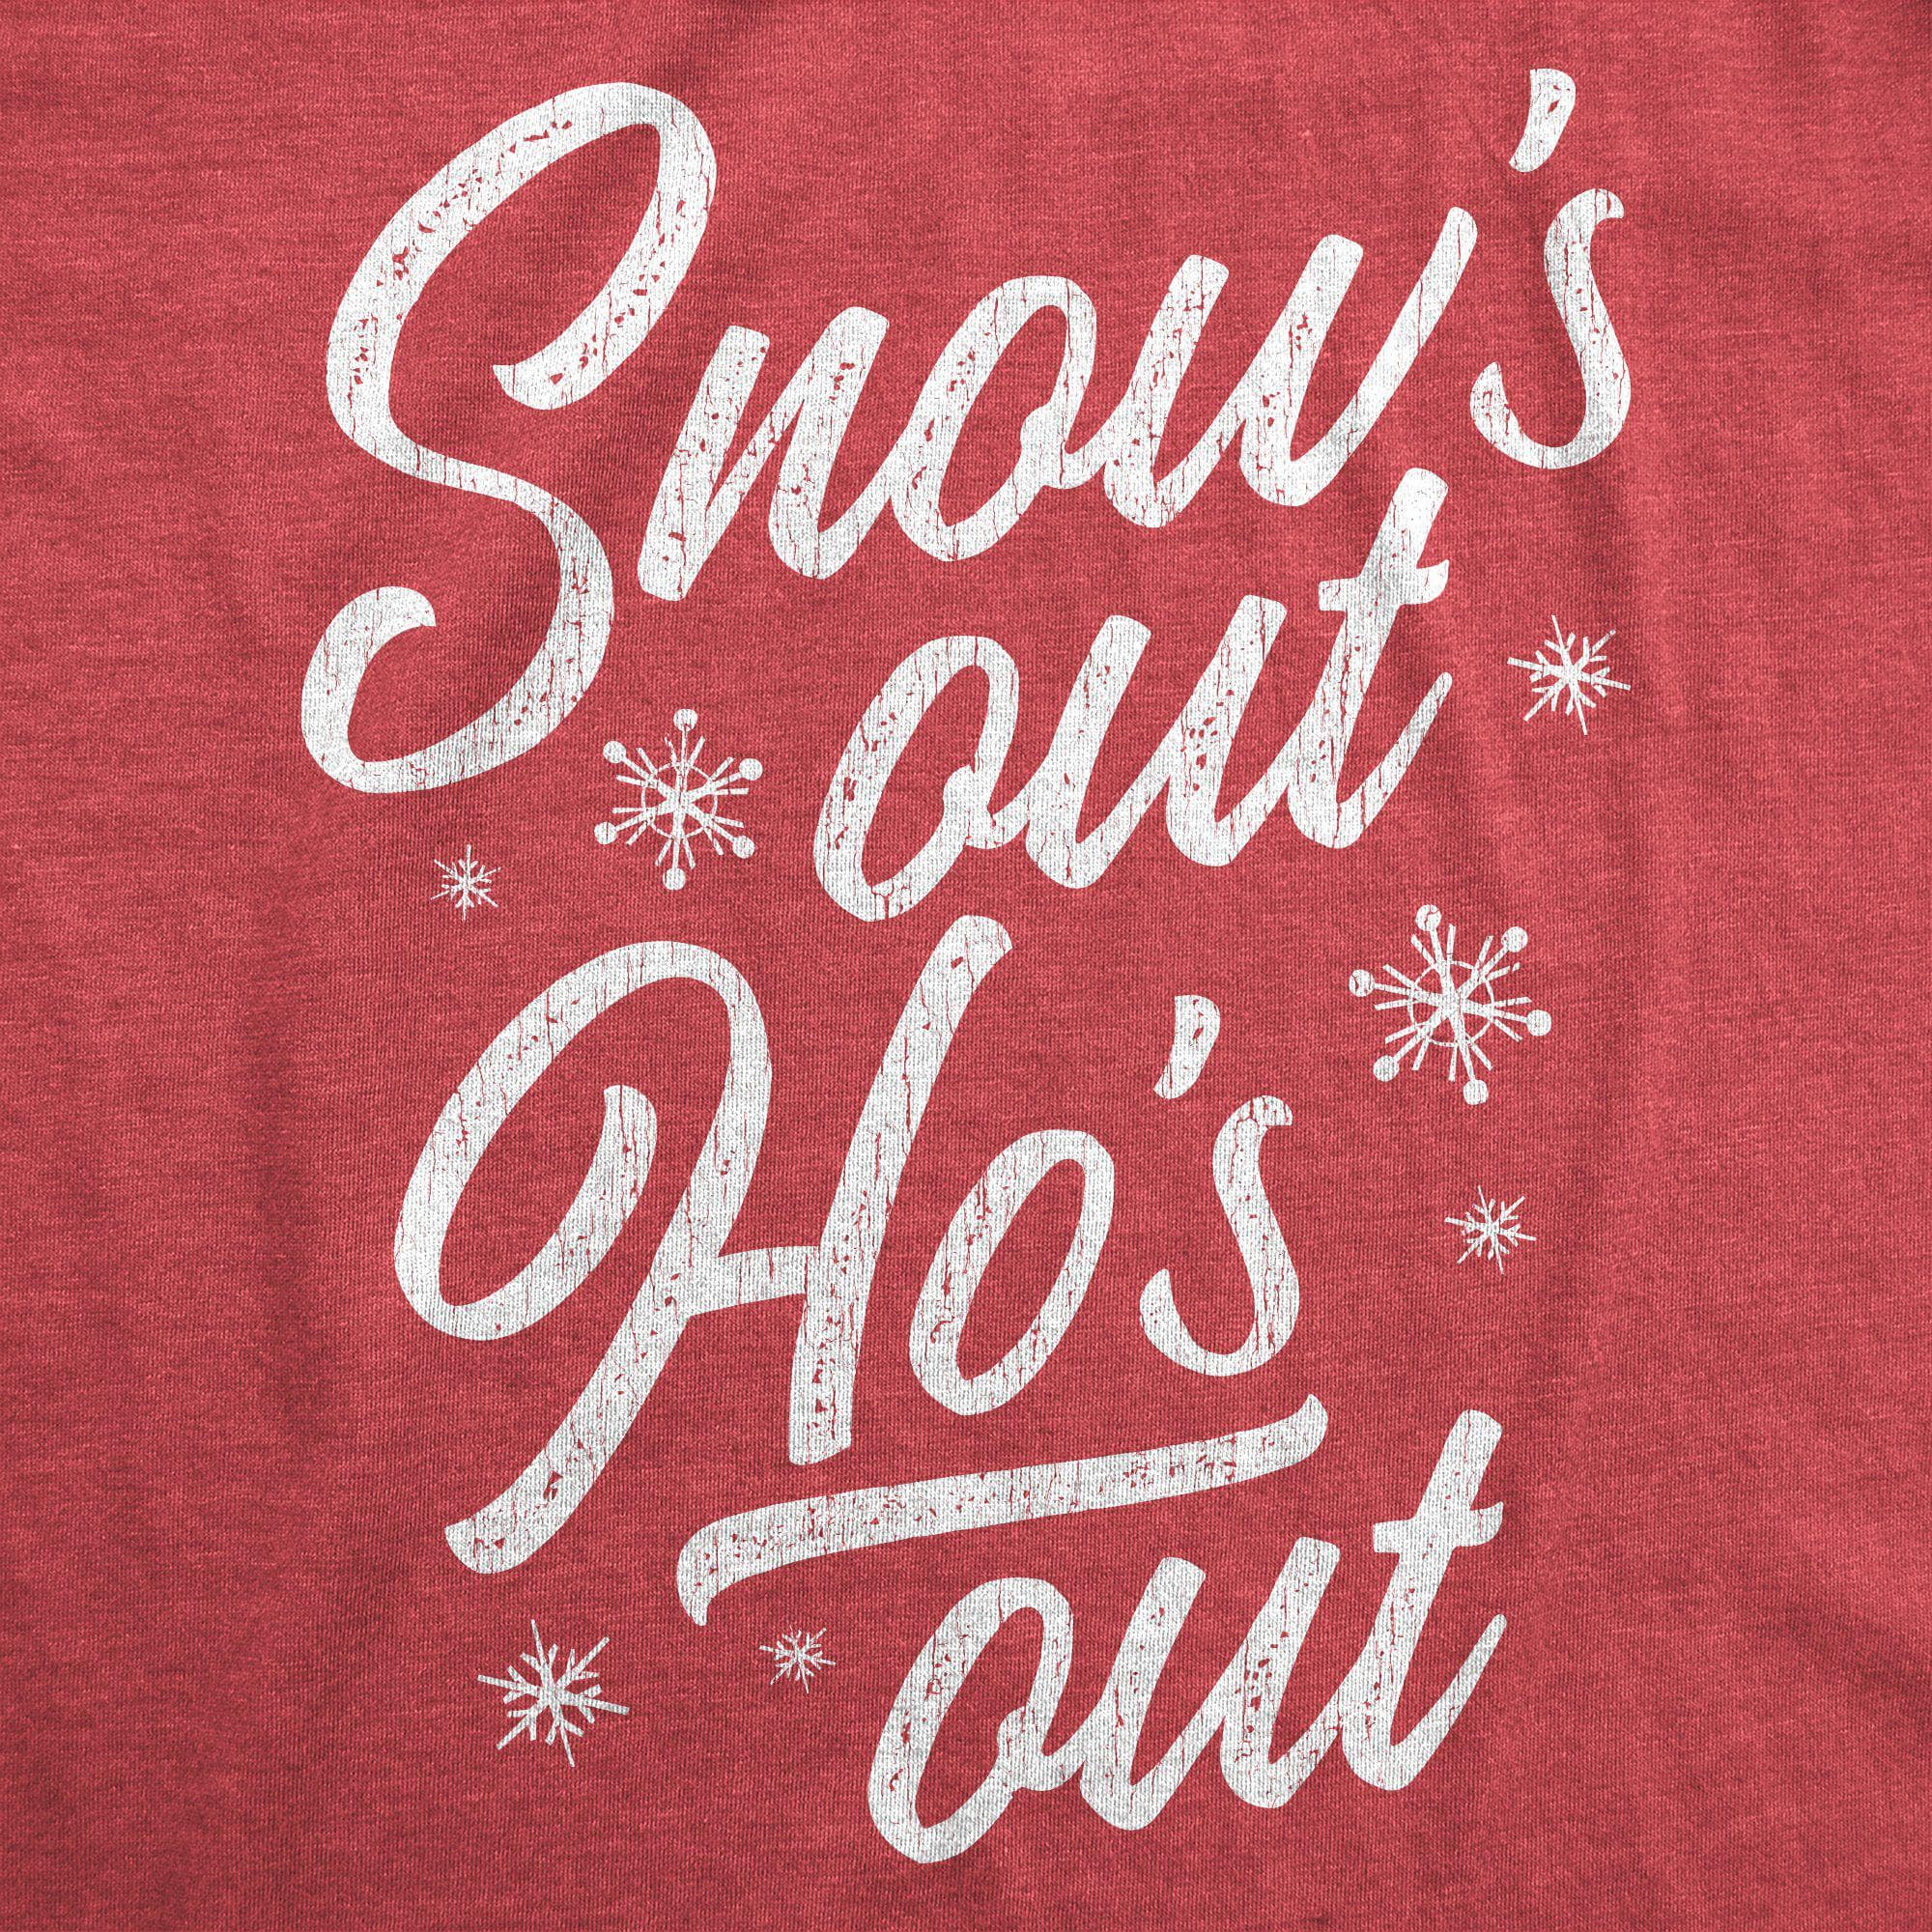 Snow's Out Ho's Out Women's Tshirt - Crazy Dog T-Shirts